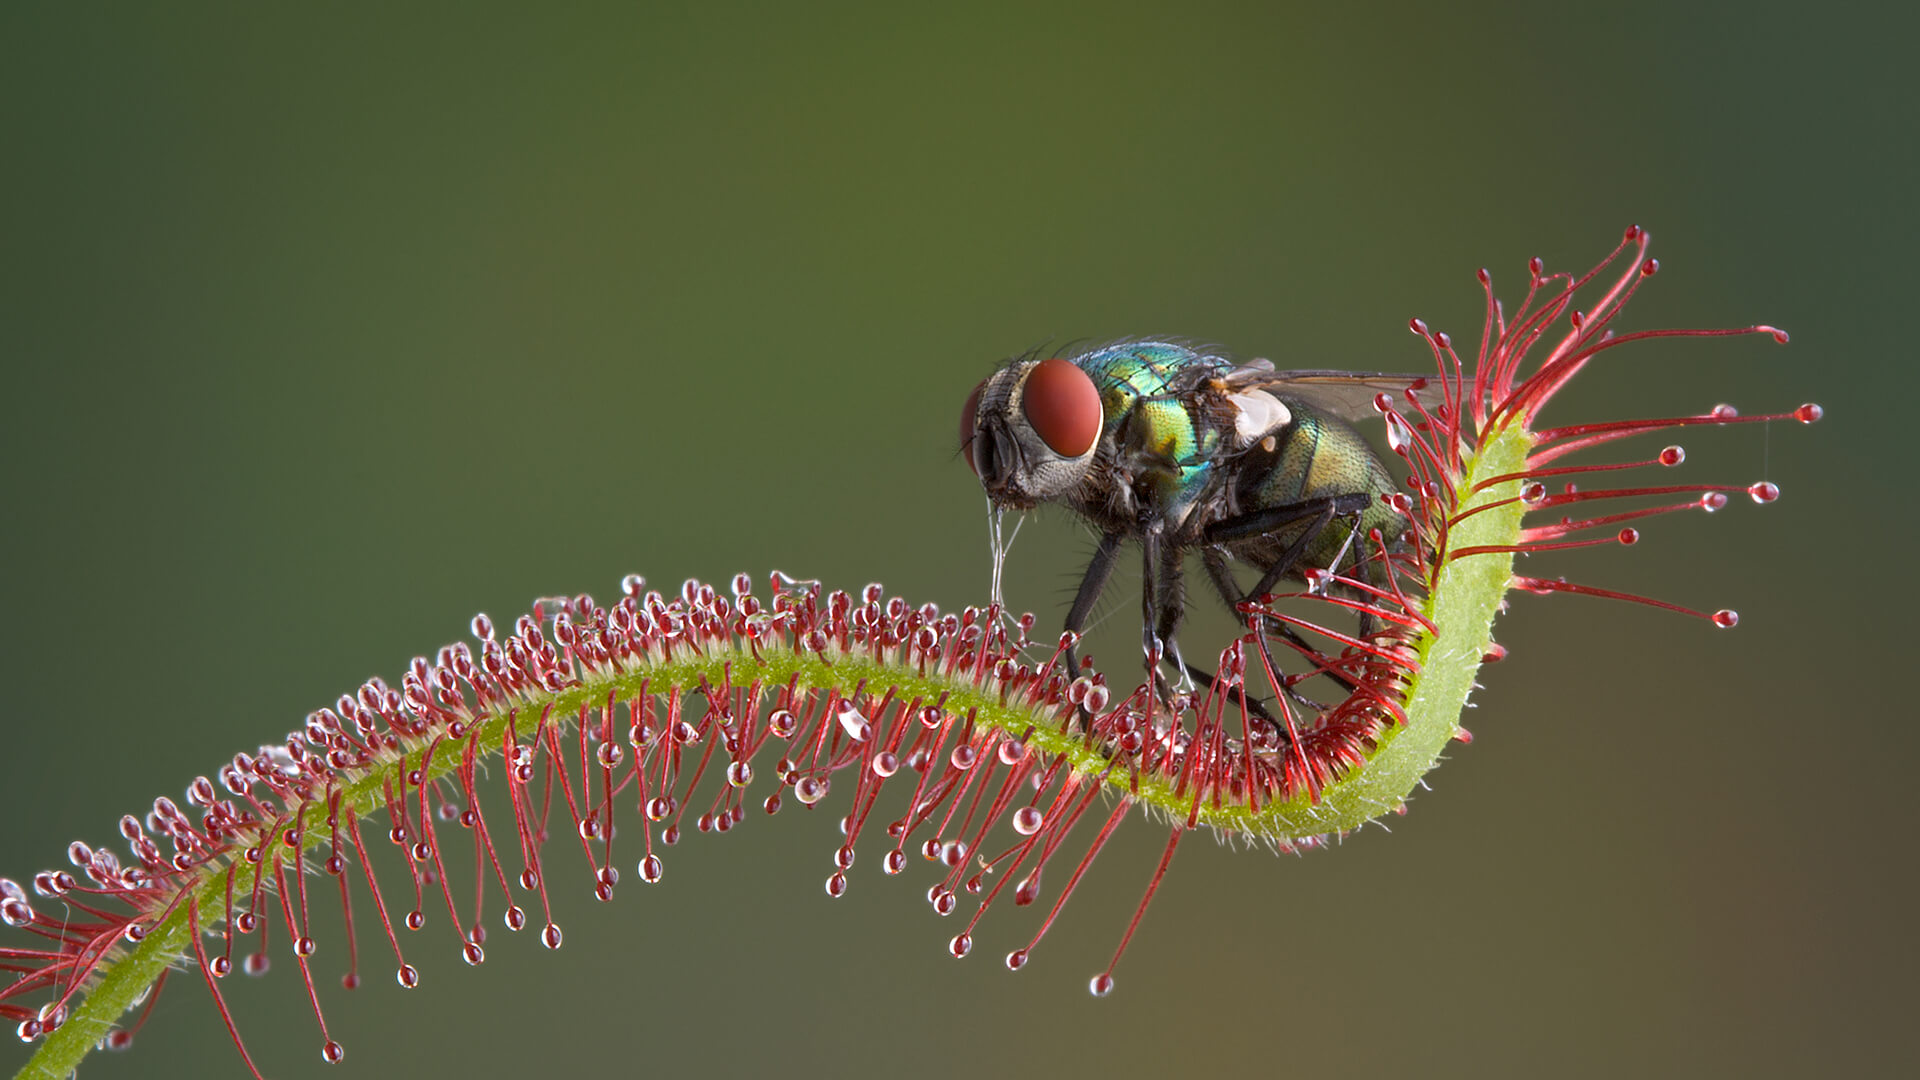 How Does An Australian Sundew Plant Catch Insects